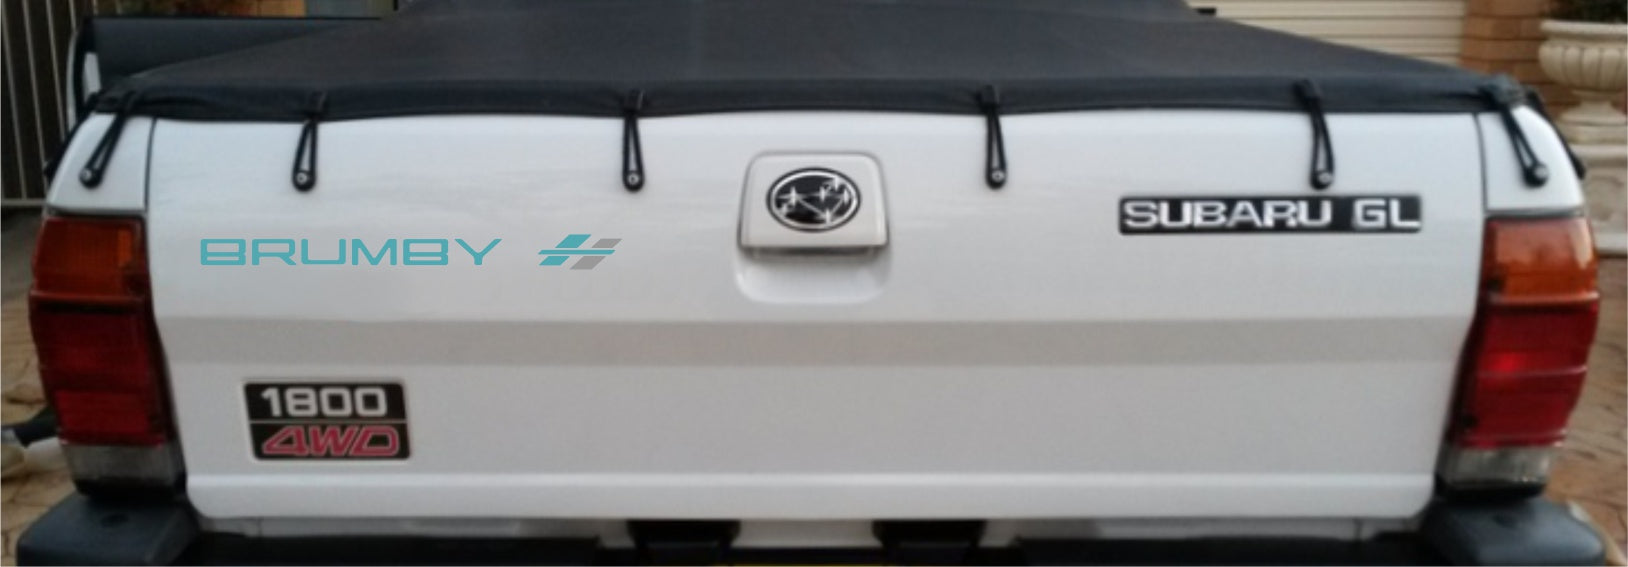 Brumby Teal Rear Tailgate